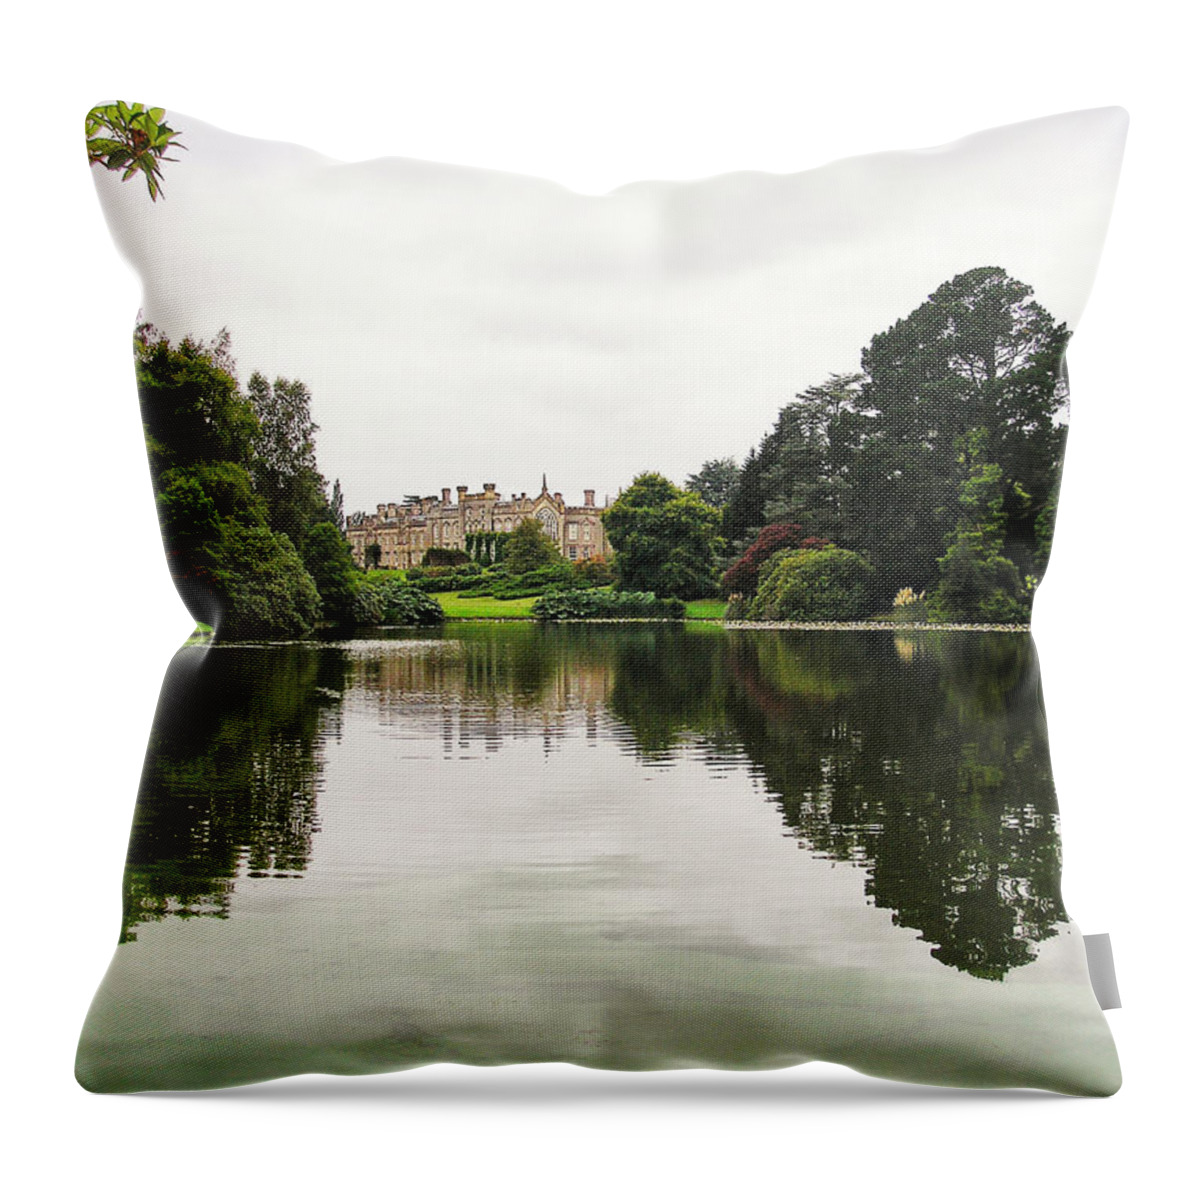 Connie Handscomb Throw Pillow featuring the photograph Kingdom by Connie Handscomb